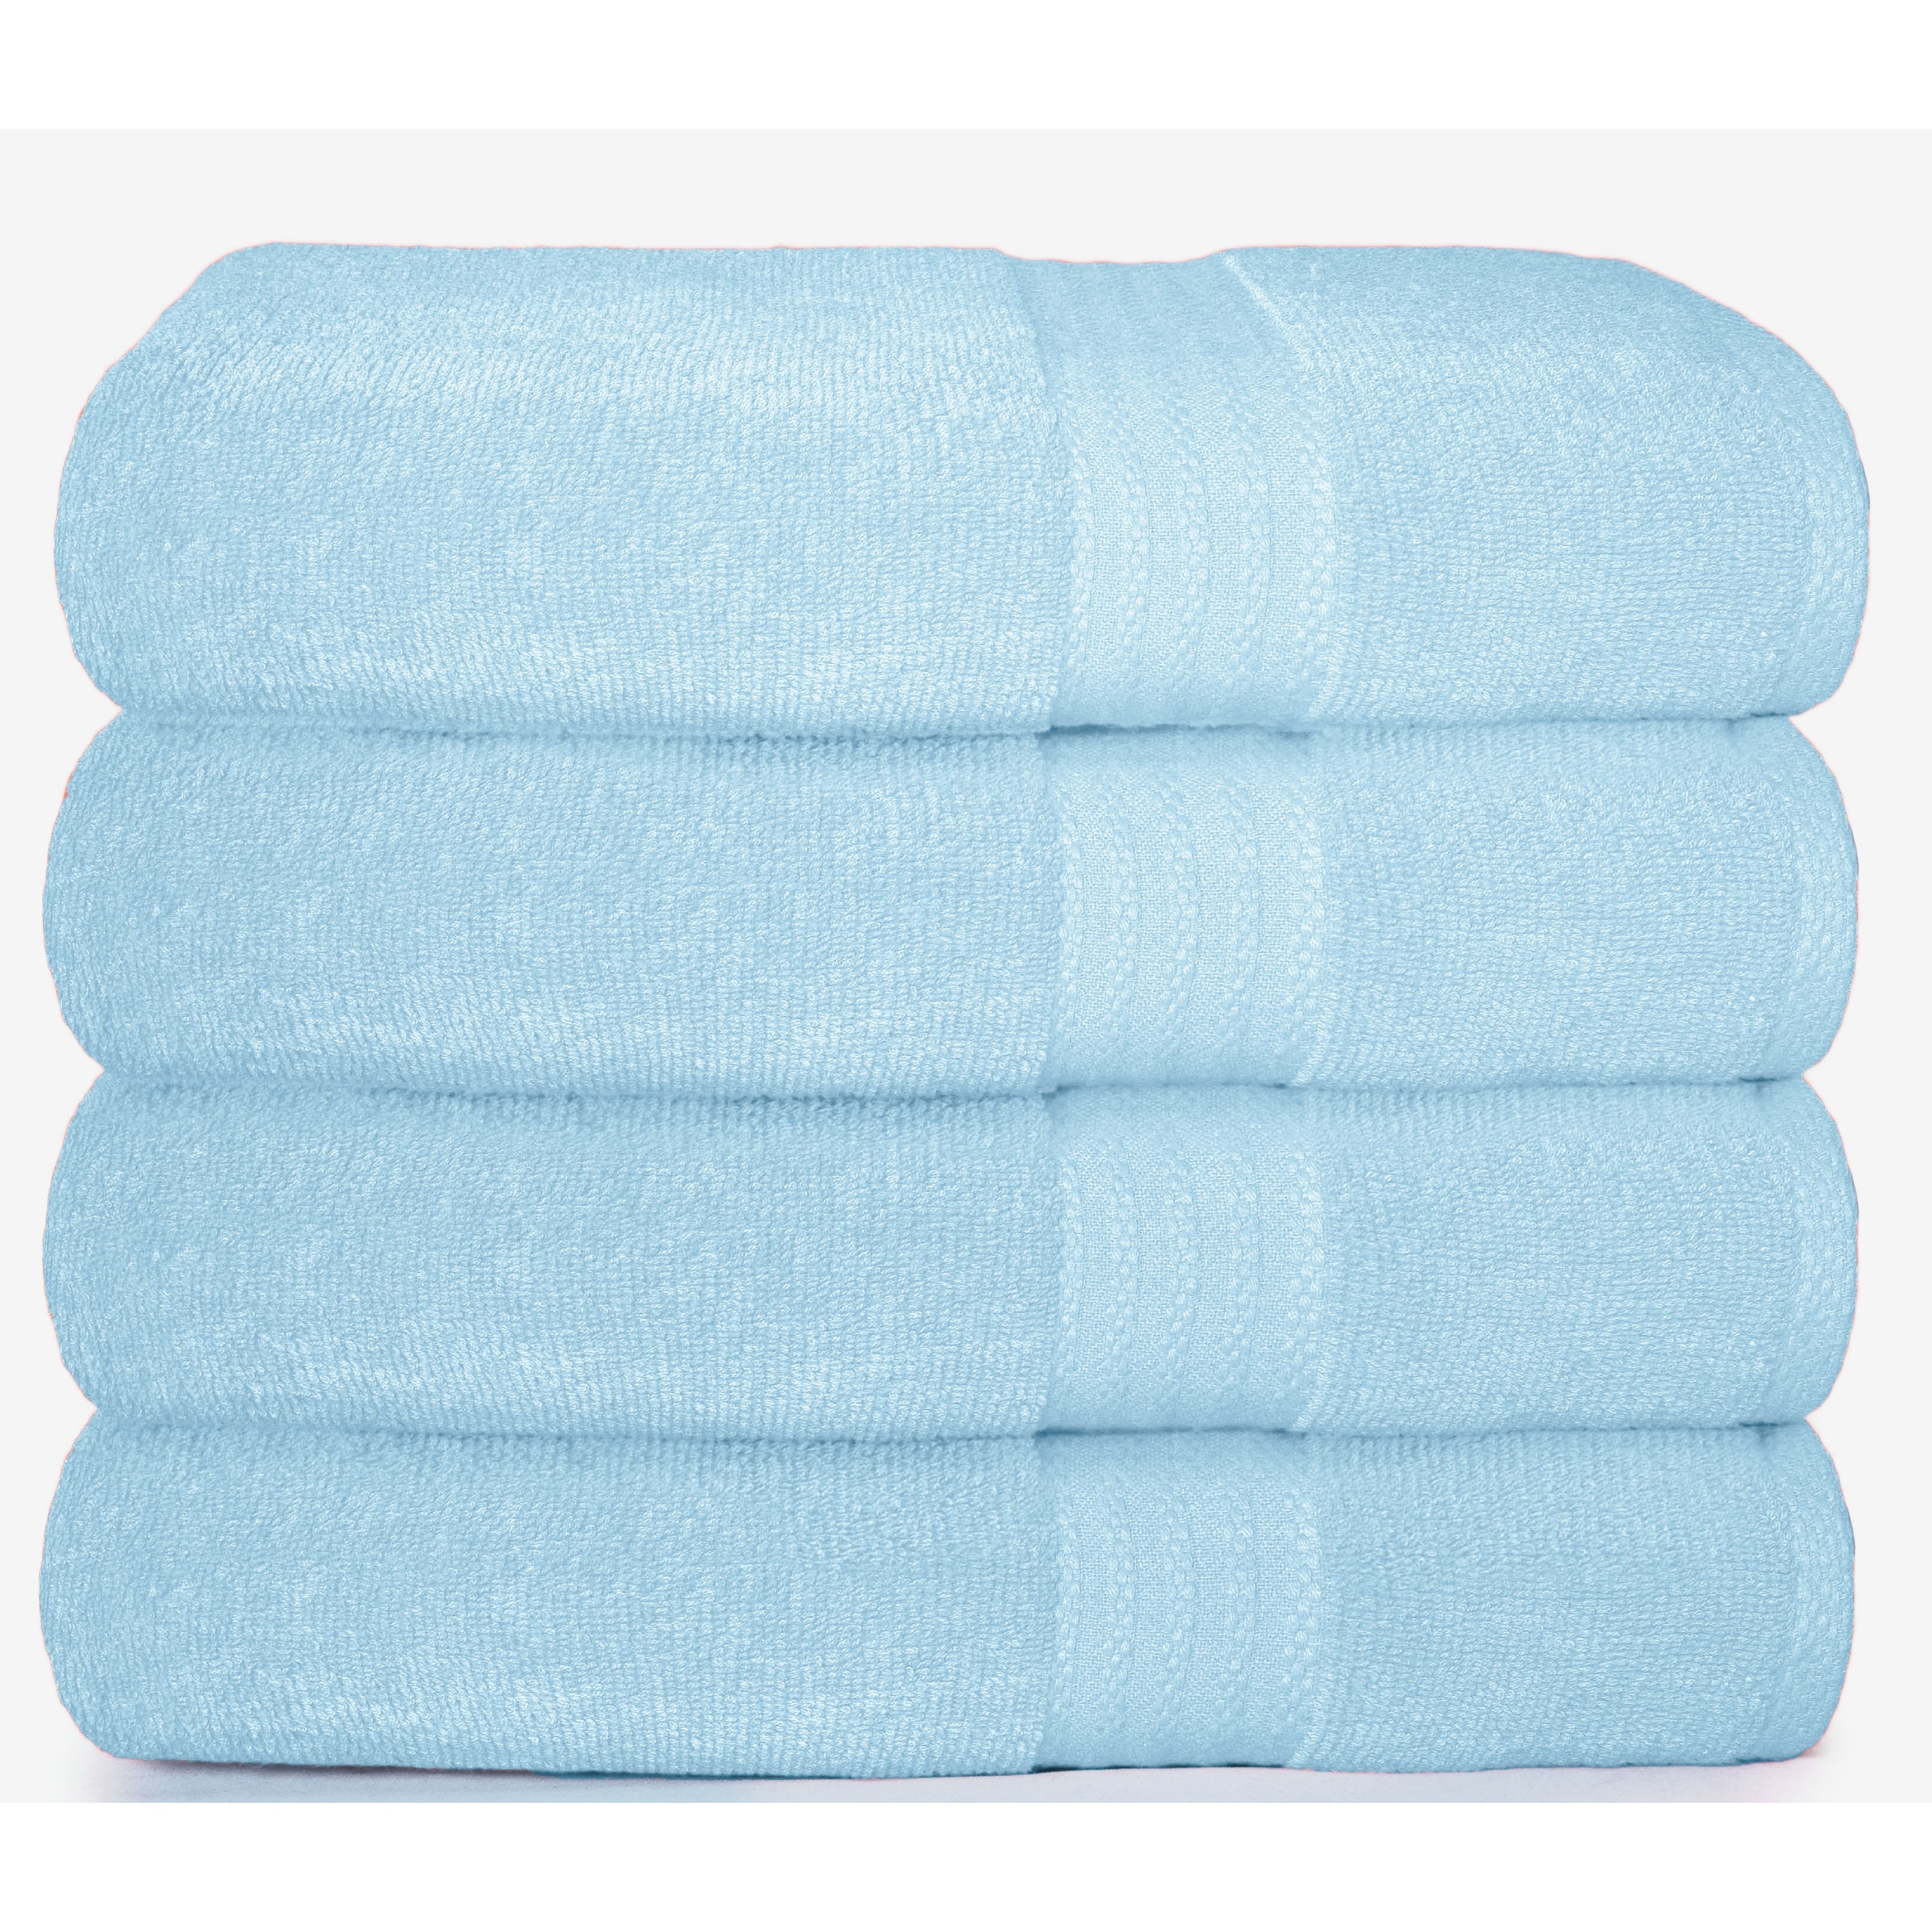 Hasen Hotel Luxury Bath Towel 6-Pack Set  100% Pure Cotton, Spa Quality  Absorbent, 1 - Fred Meyer